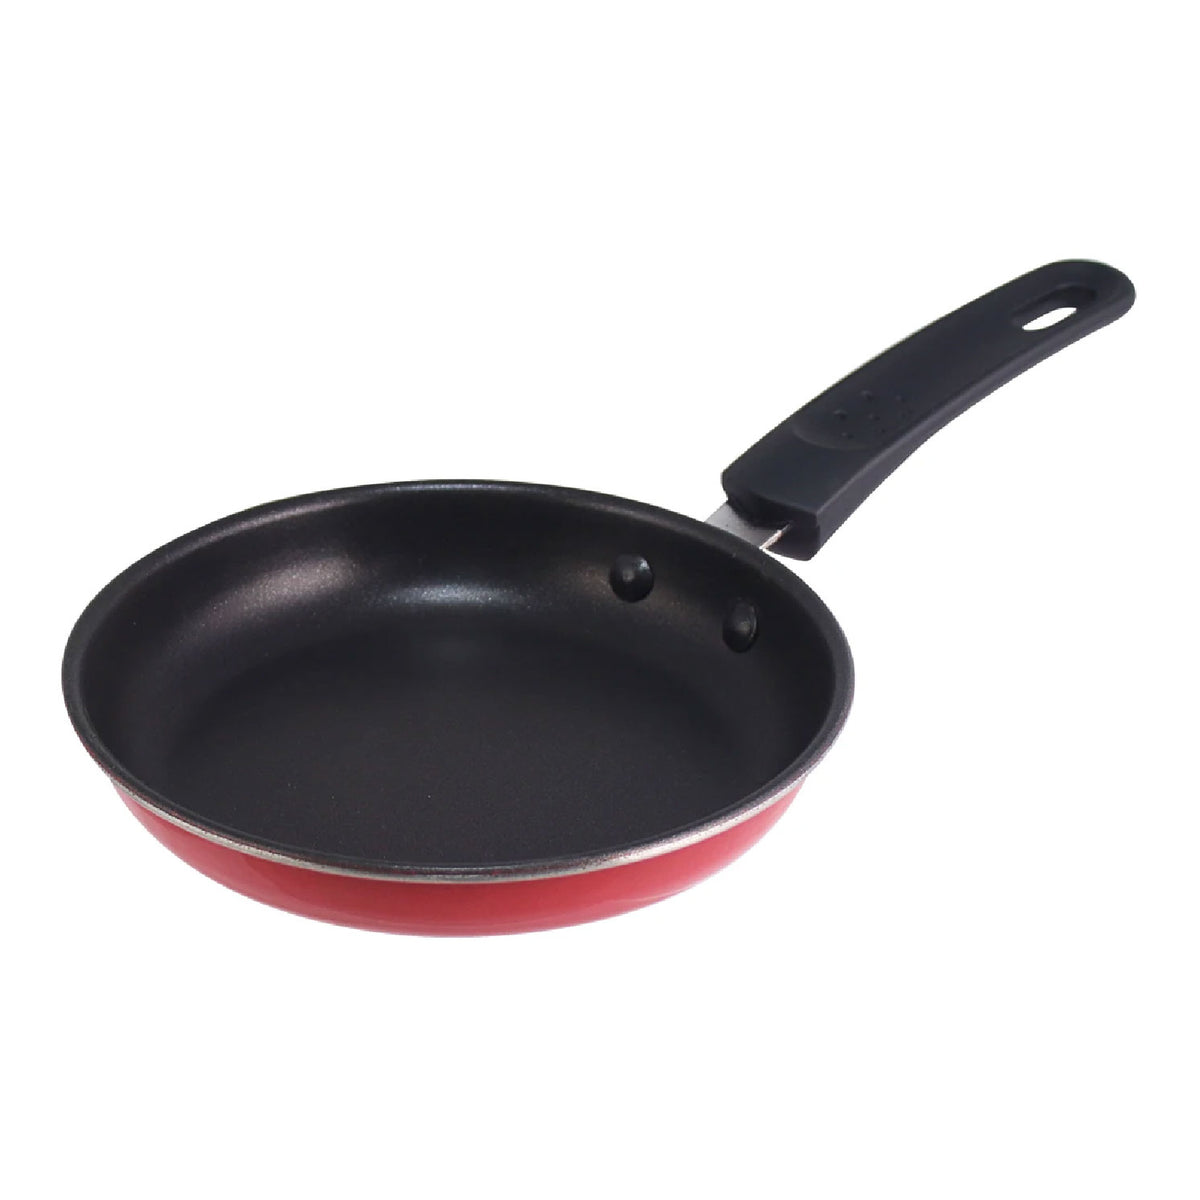 1pc, Nonstick Saucepan with Lid - PFOA Free Cooking Pot with Pour Spout -  Multiple Sizes Available - Essential Kitchen Gadget and Accessory